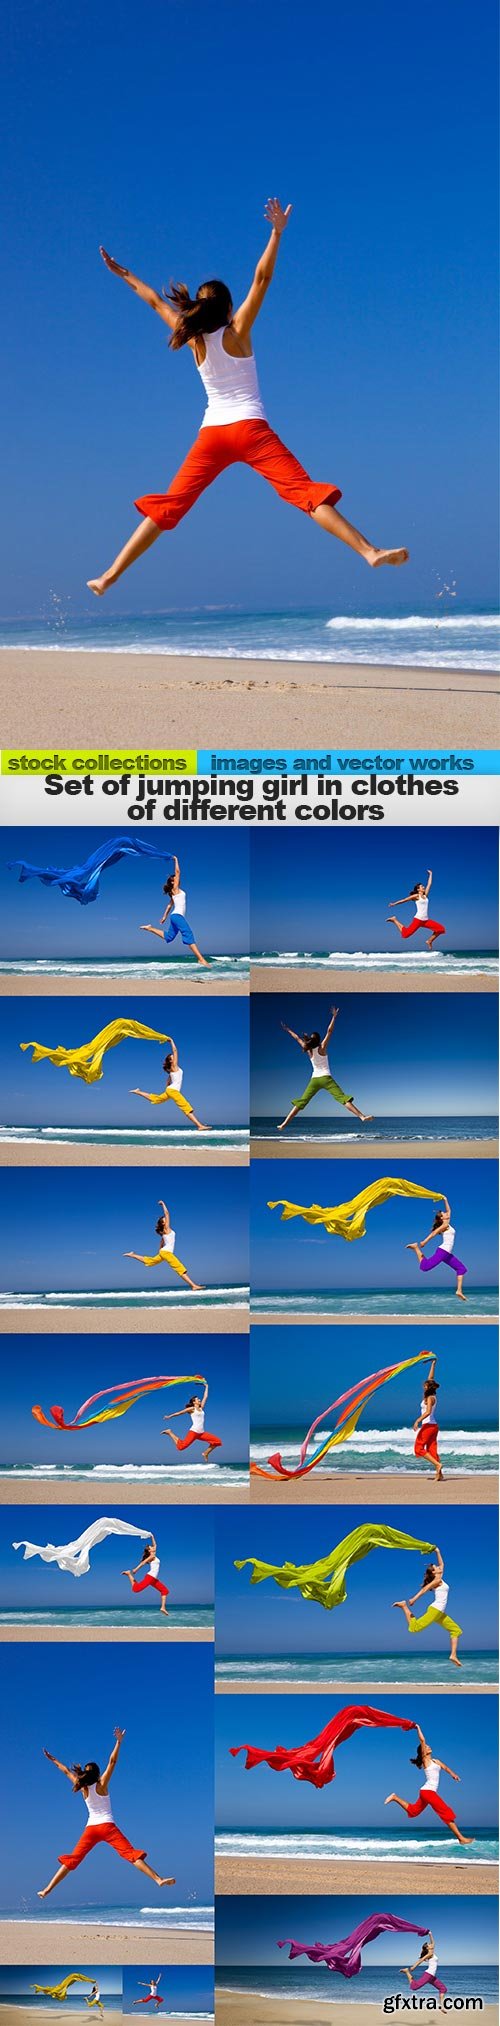 Set of jumping girl in clothes of different colors, 15 x UHQ JPEG